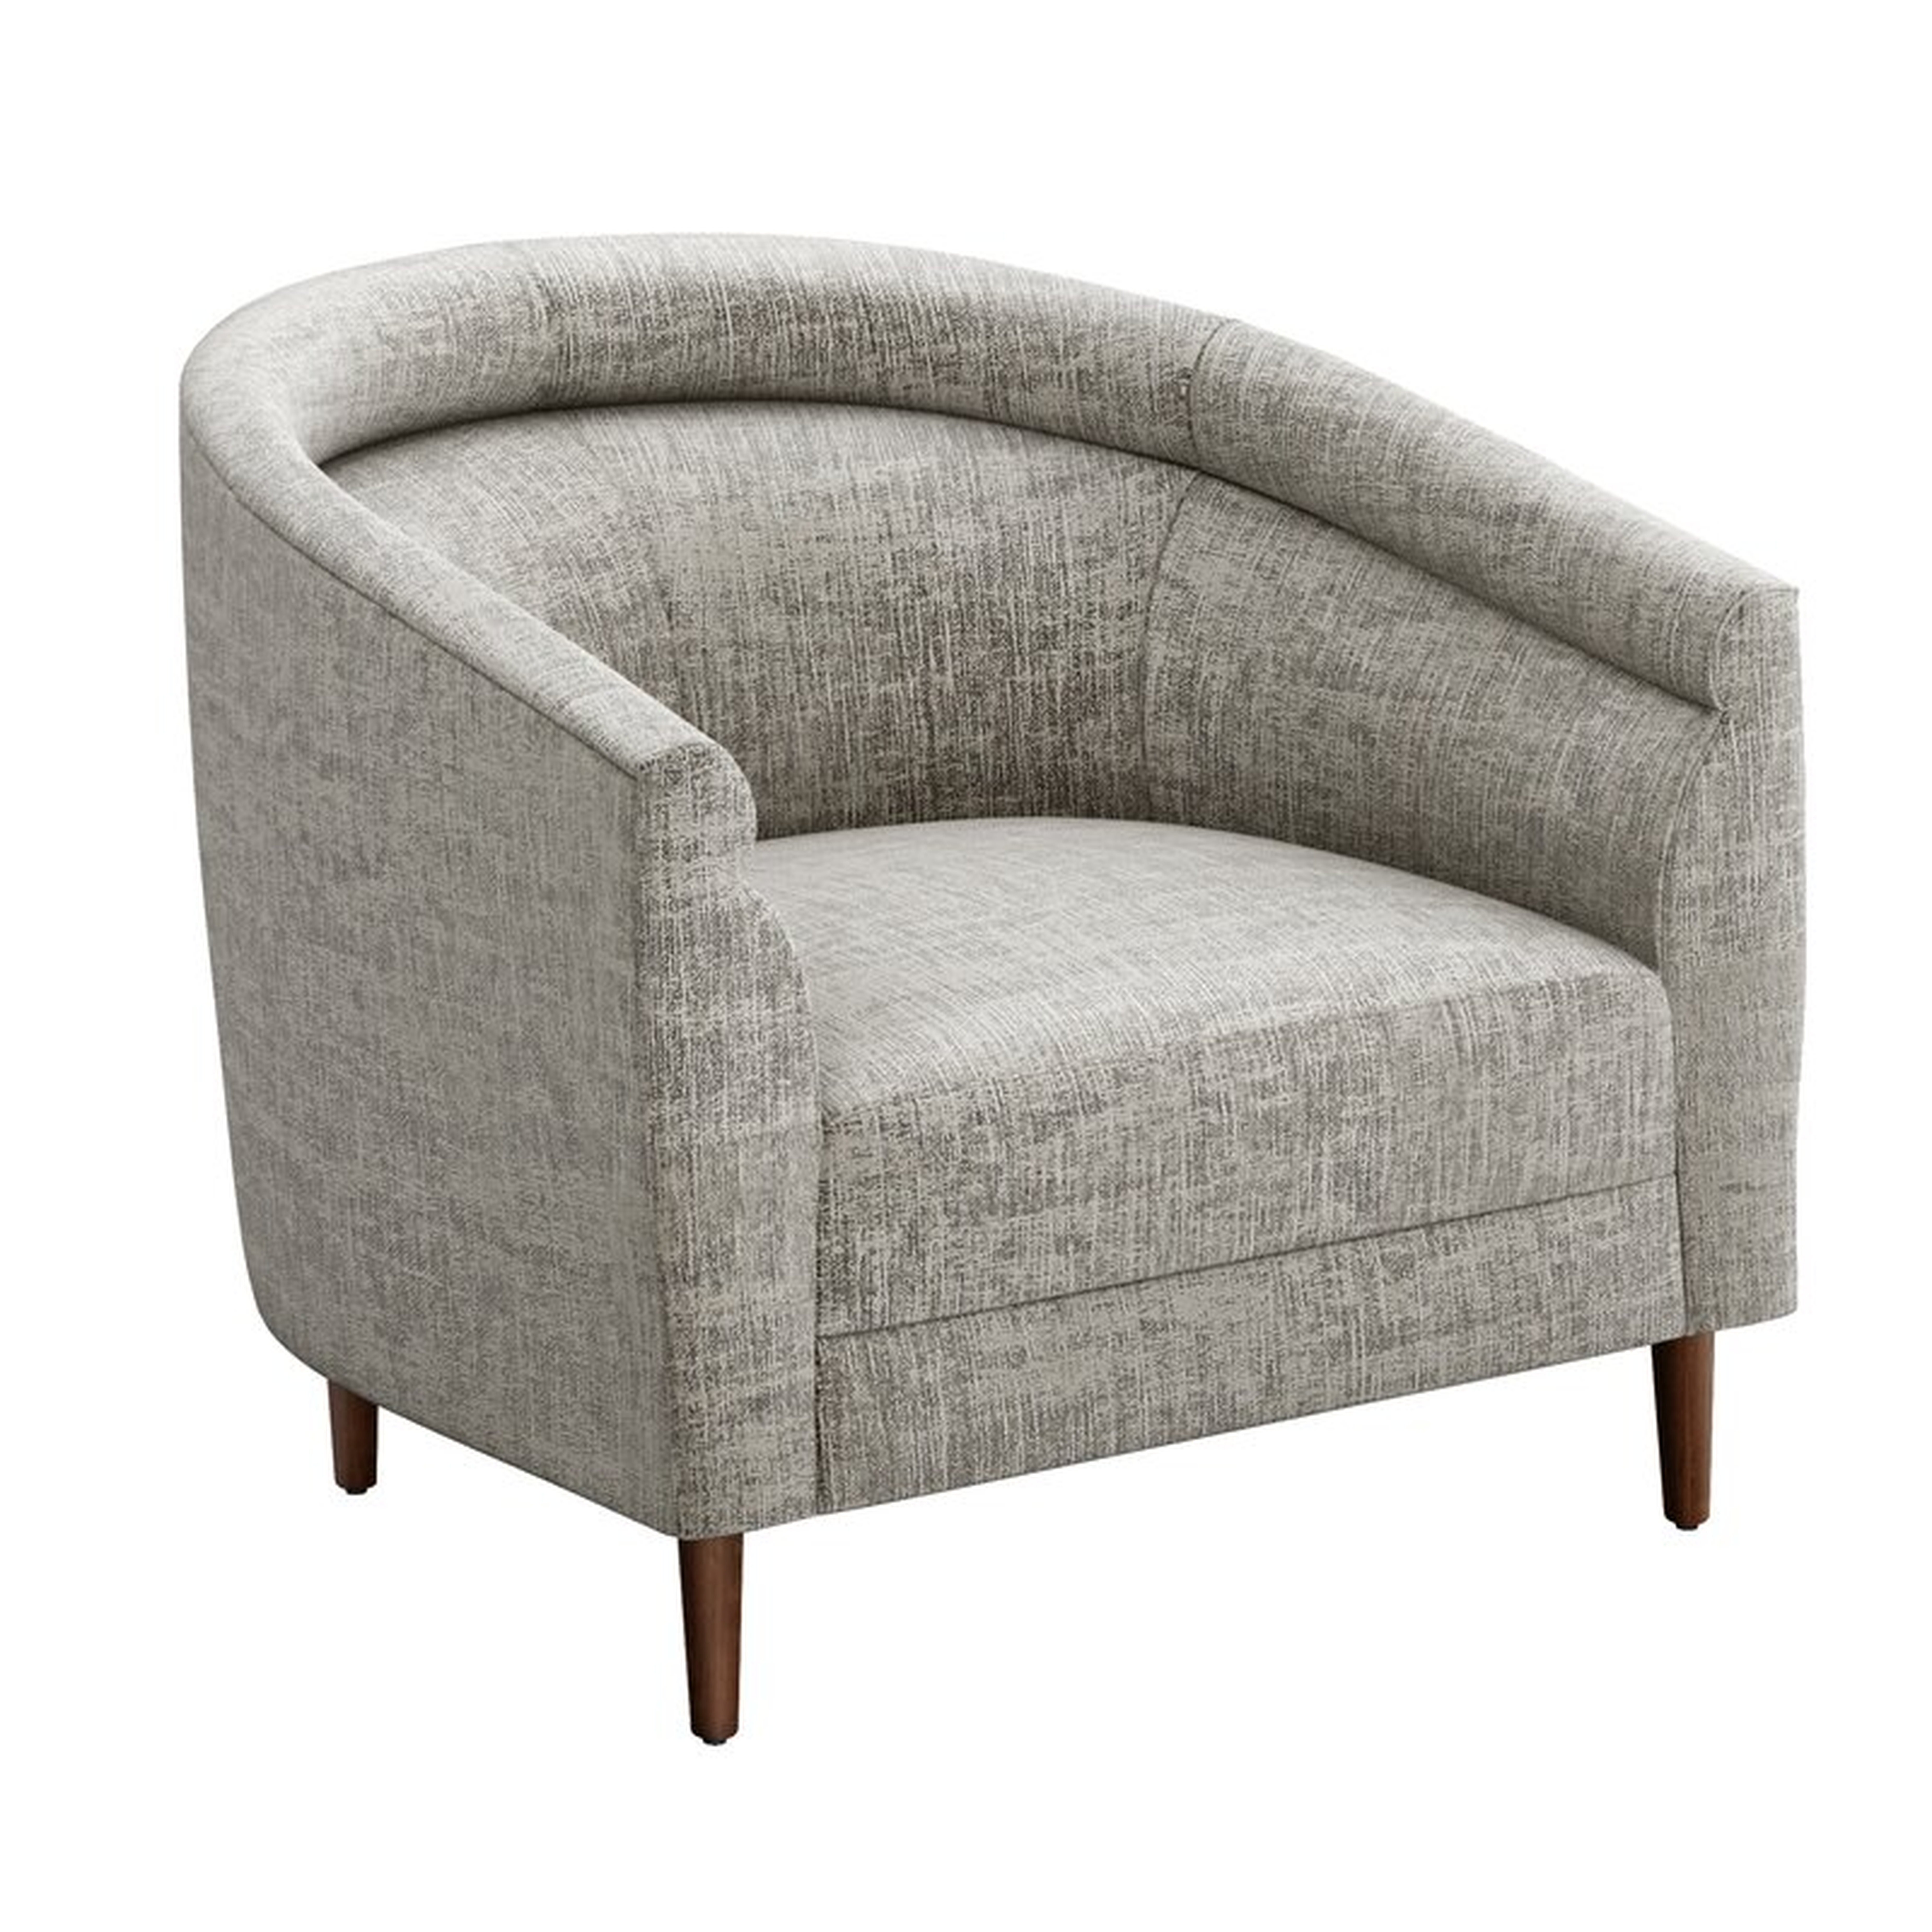 Interlude Capri Lounge Chair Upholstery Color: Feather - Perigold